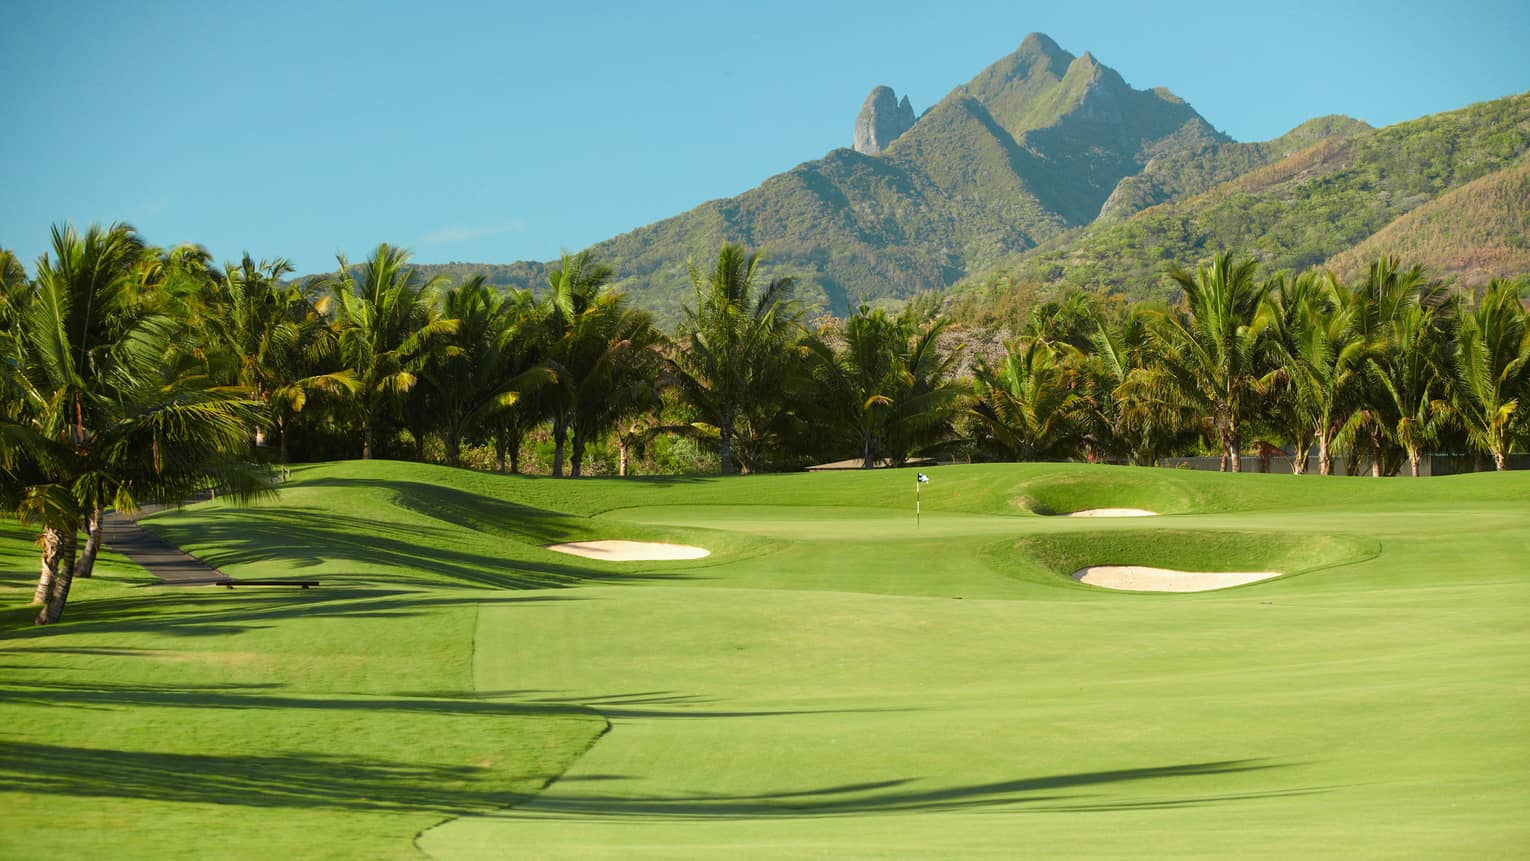 Fifteenth hole rolling golf course green dotted by two sand traps, mountain backdrop